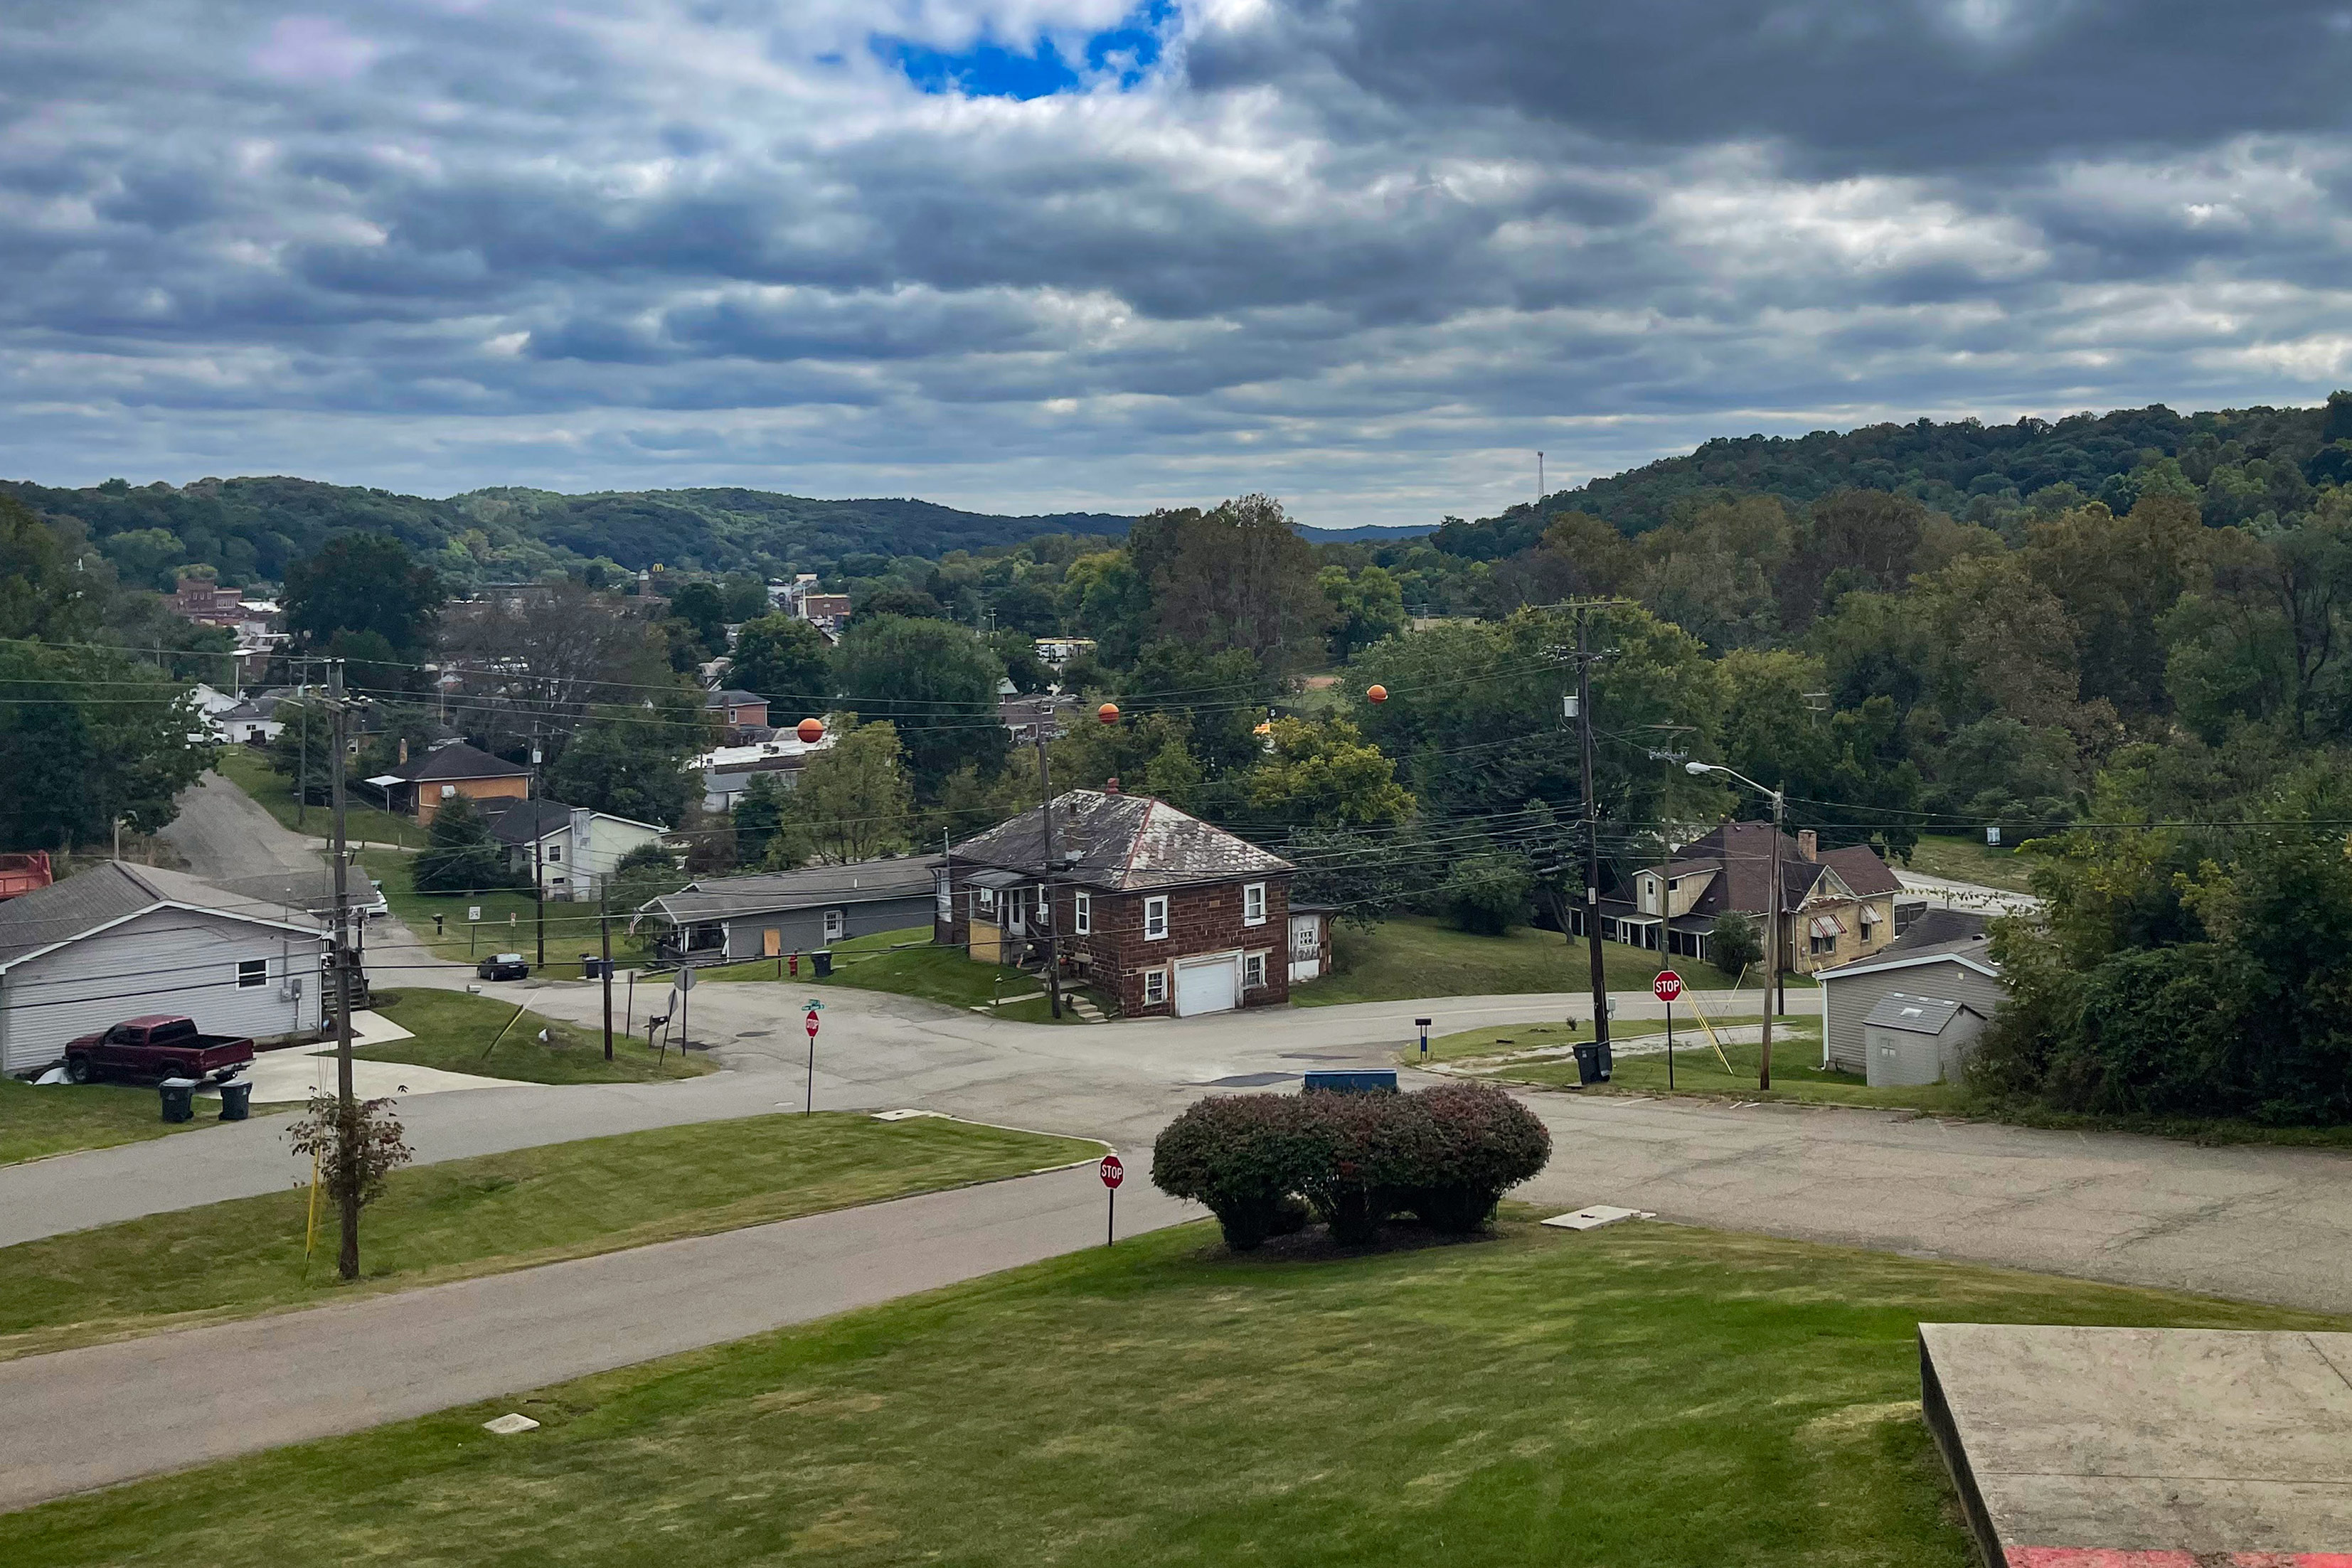 Photo shows a view of downtown Nelsonville, Ohio.  It is a grassy, ​​hilly area with wide roads.